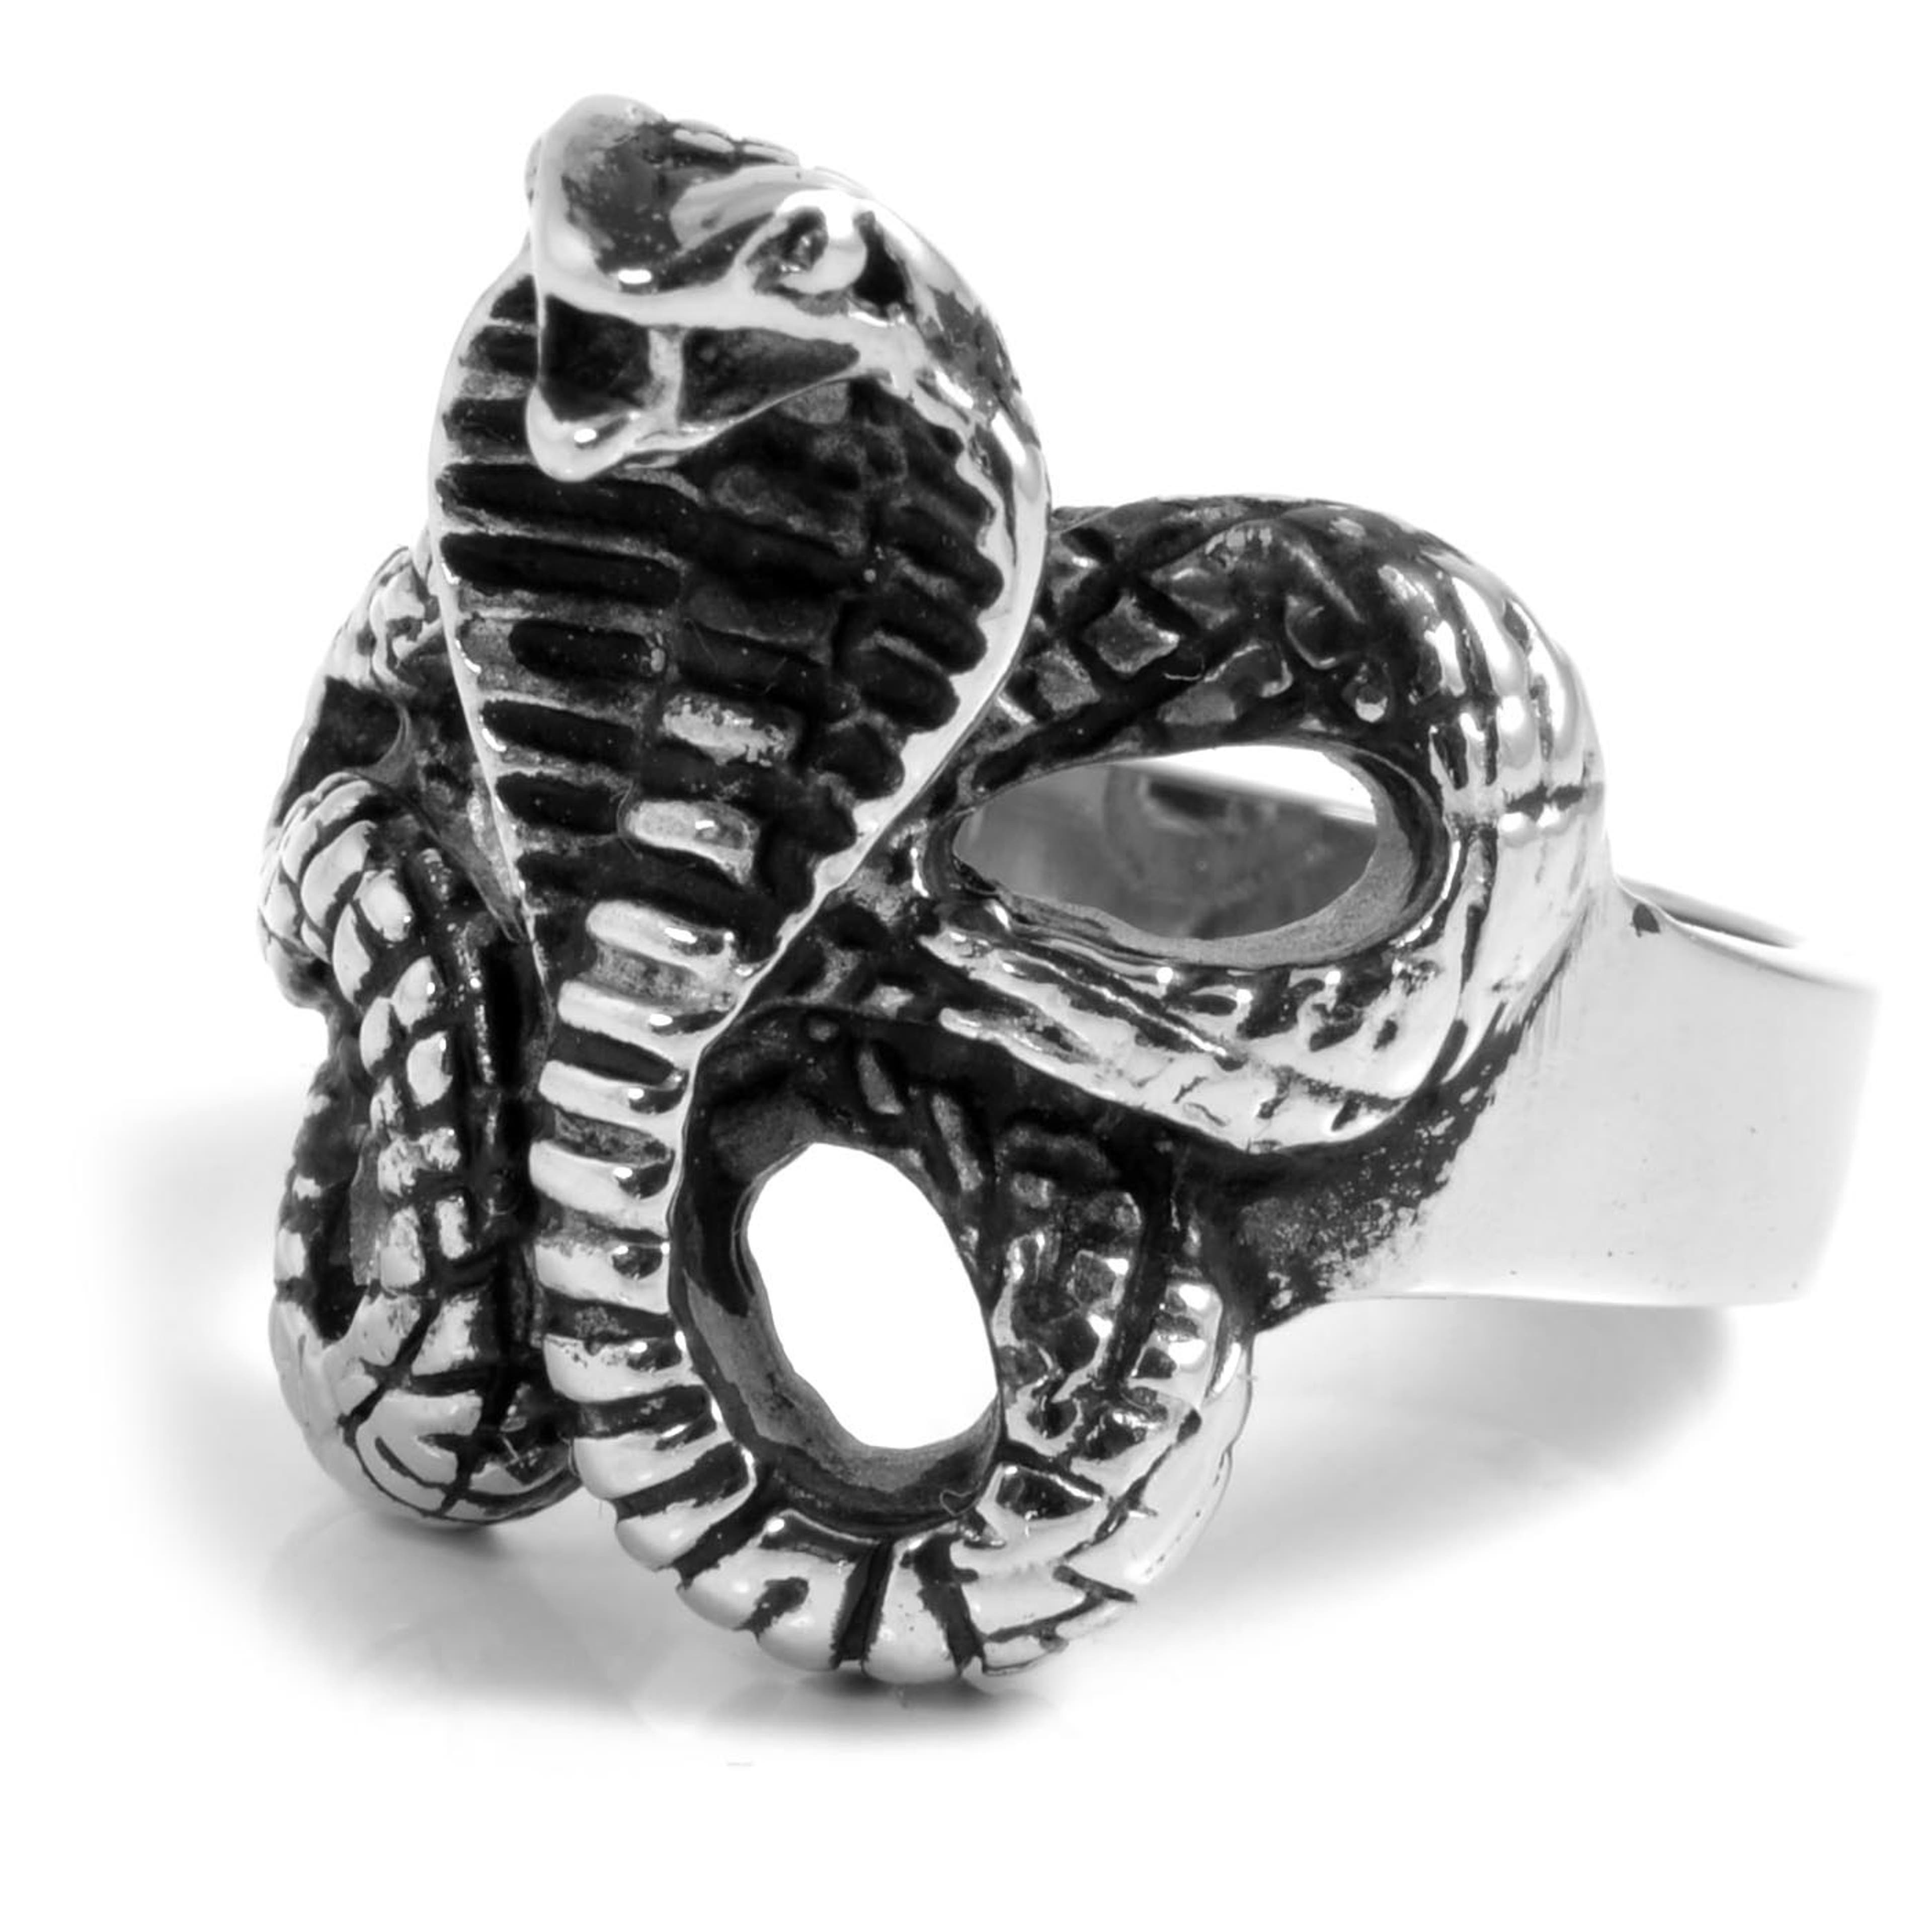 Coiled Cobra Steel Ring